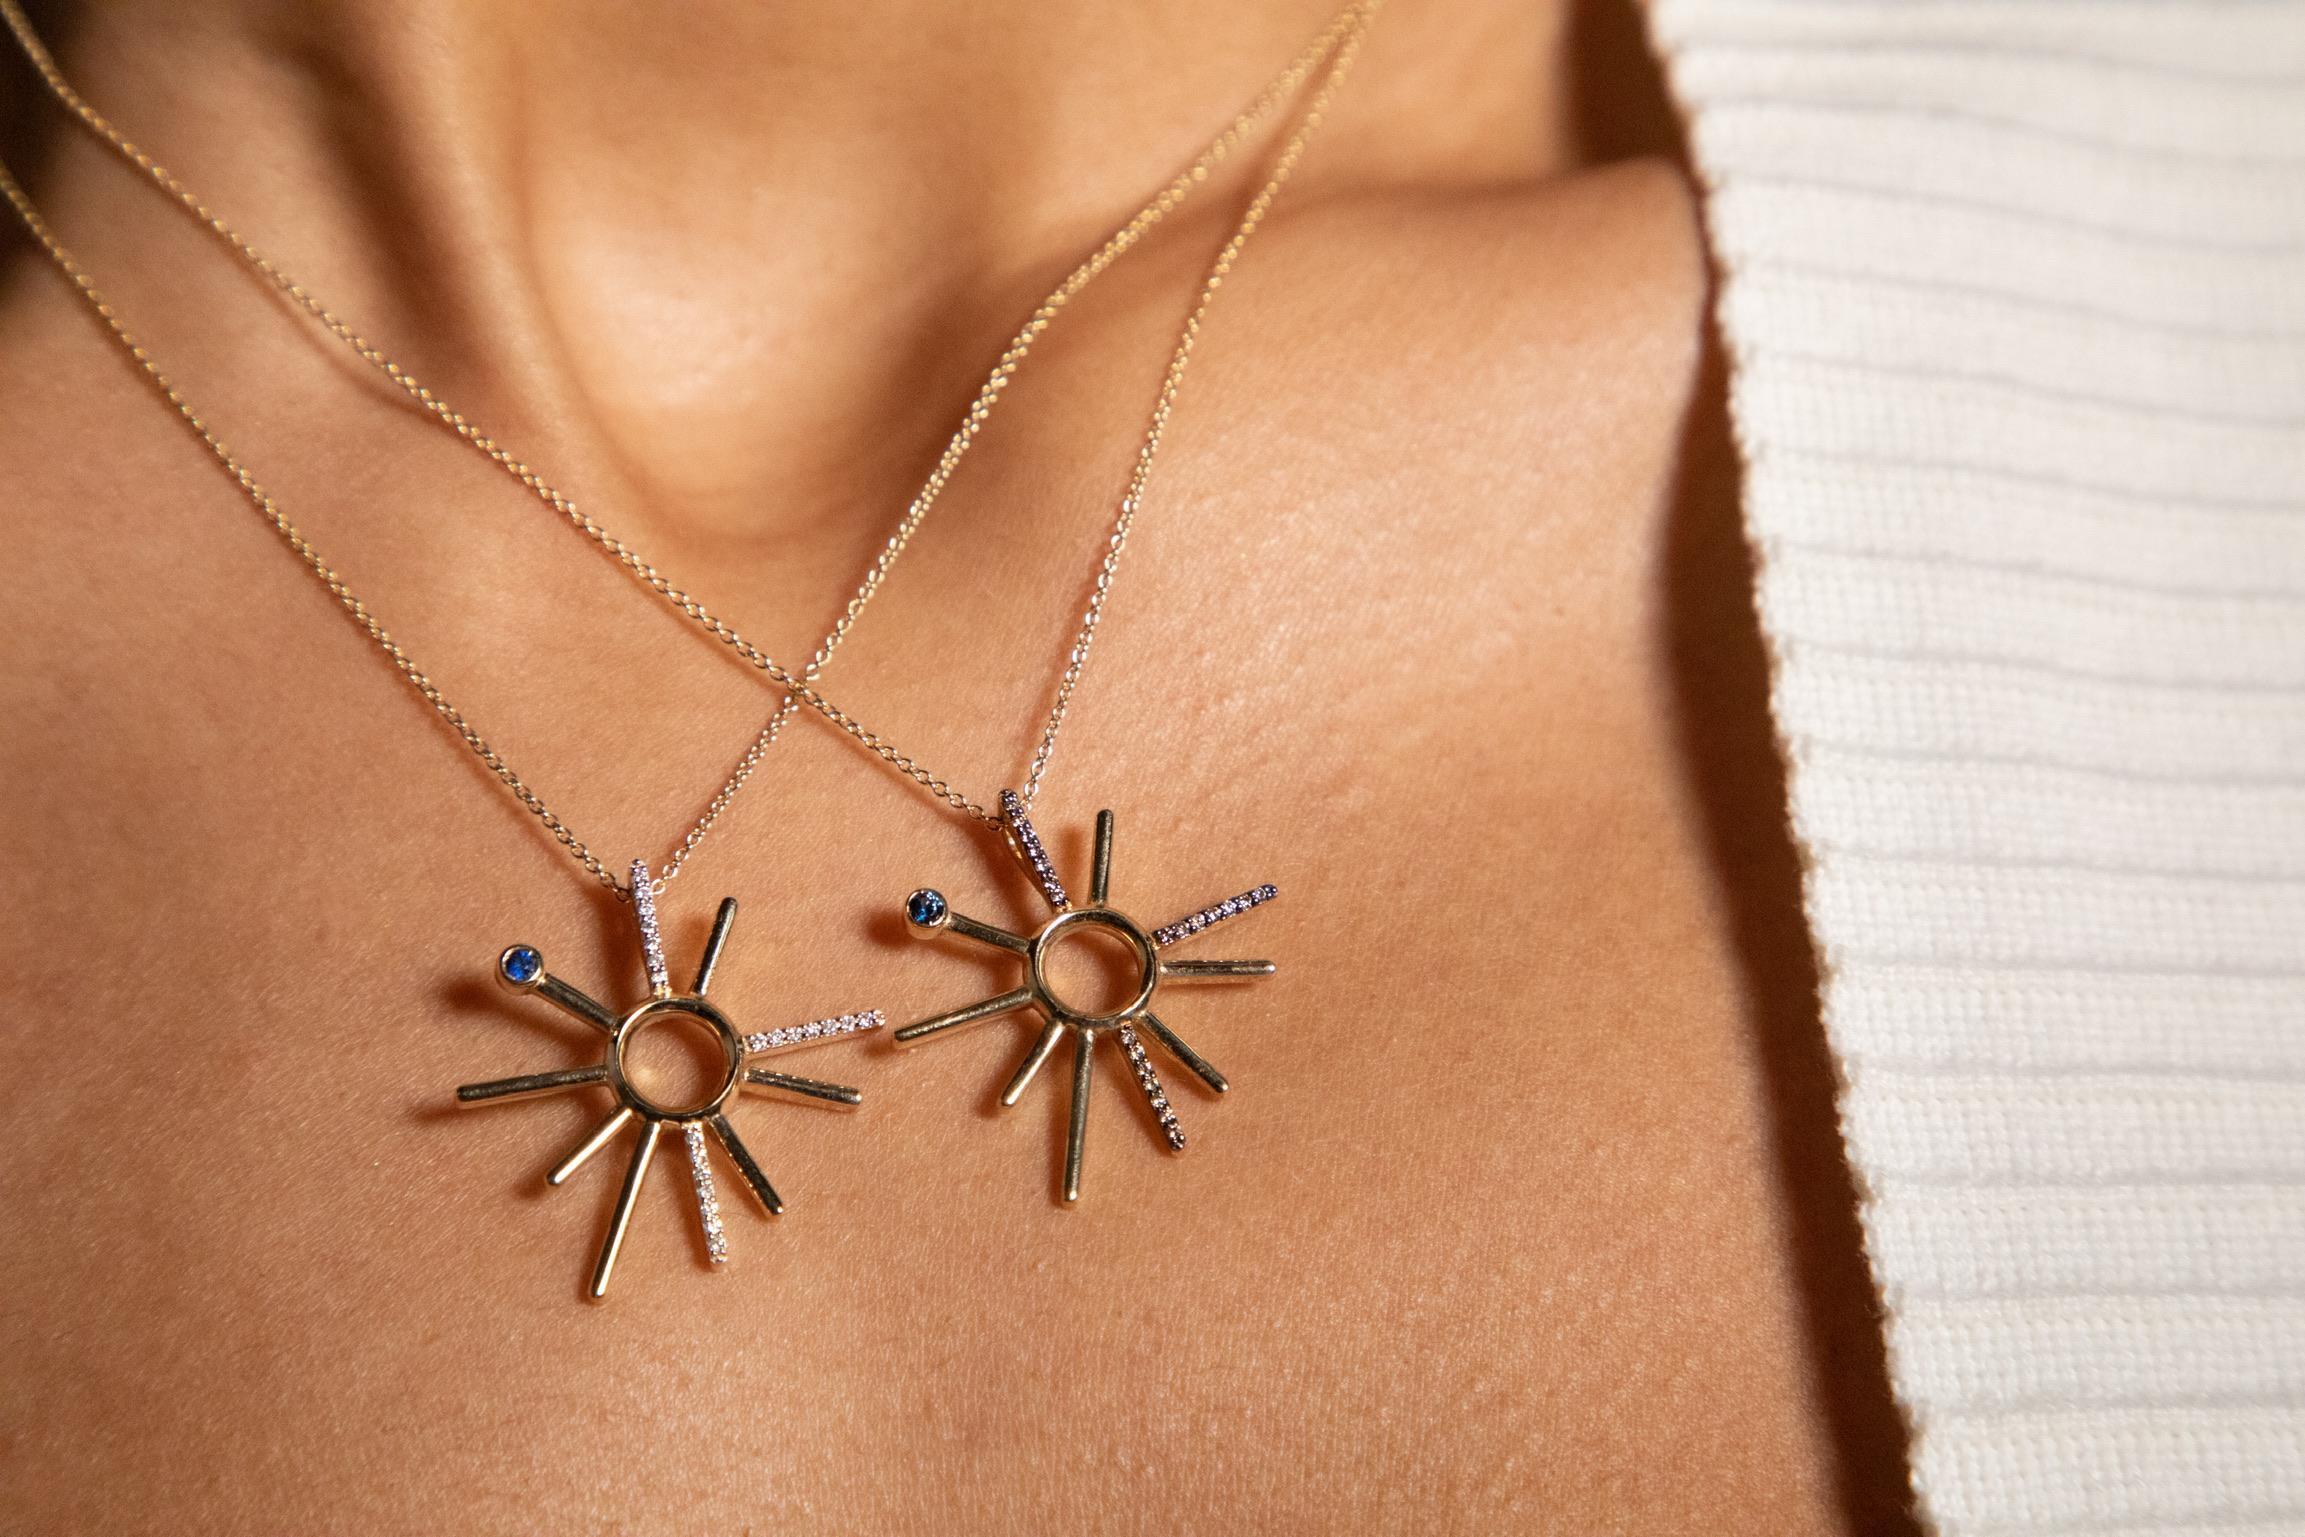 Launched in 2019, ITÄ creates fine jewelry pieces that honor each of the designer's ancestral roots while seeking an excellence in craftsmanship each story and design deserves.

¡Buenos Días! is a familiar greeting all over the world. ITÄ's sun